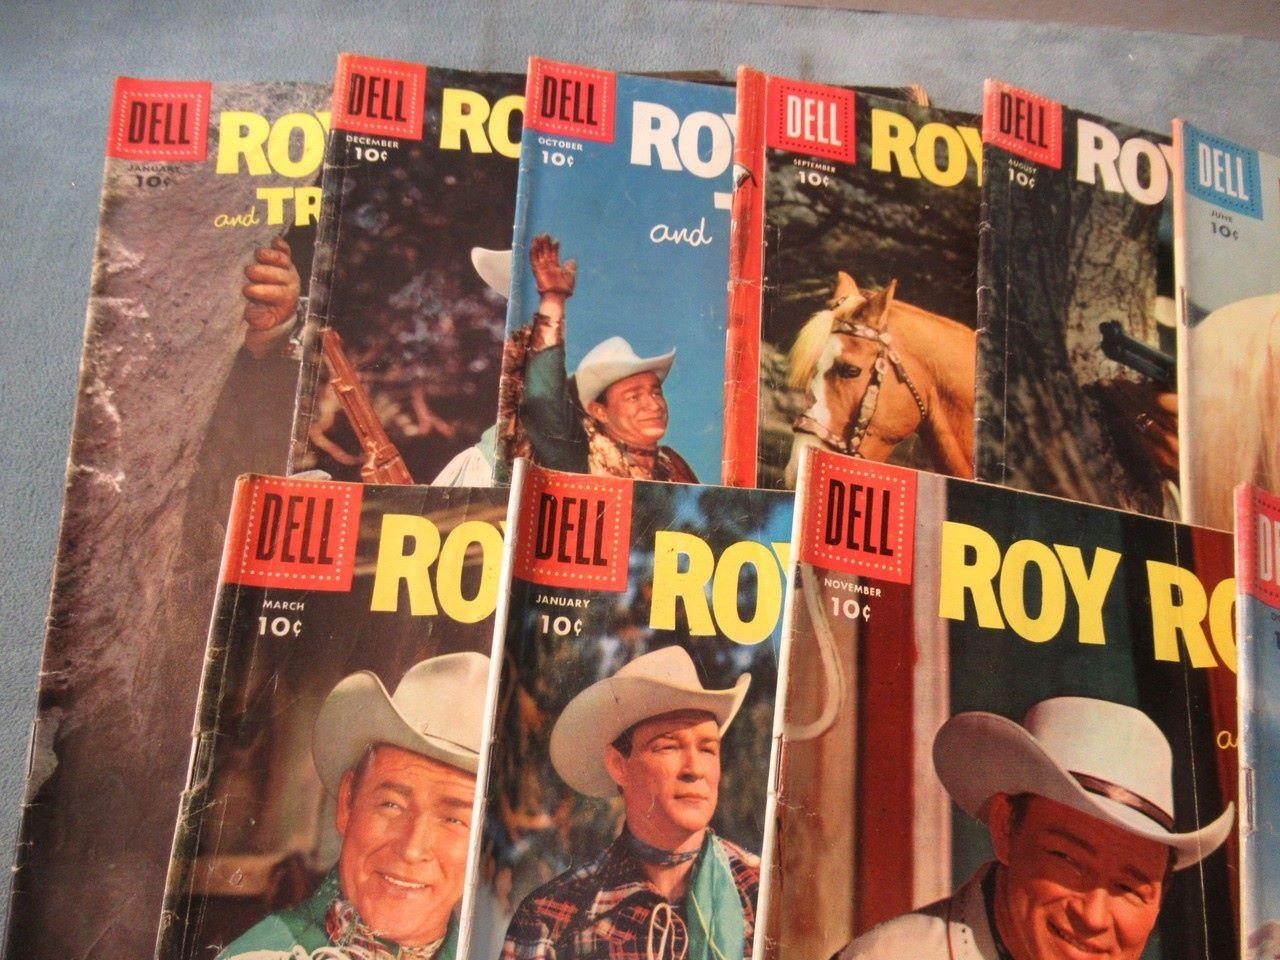 Roy Rogers and Trigger Lot of (11)/Dell